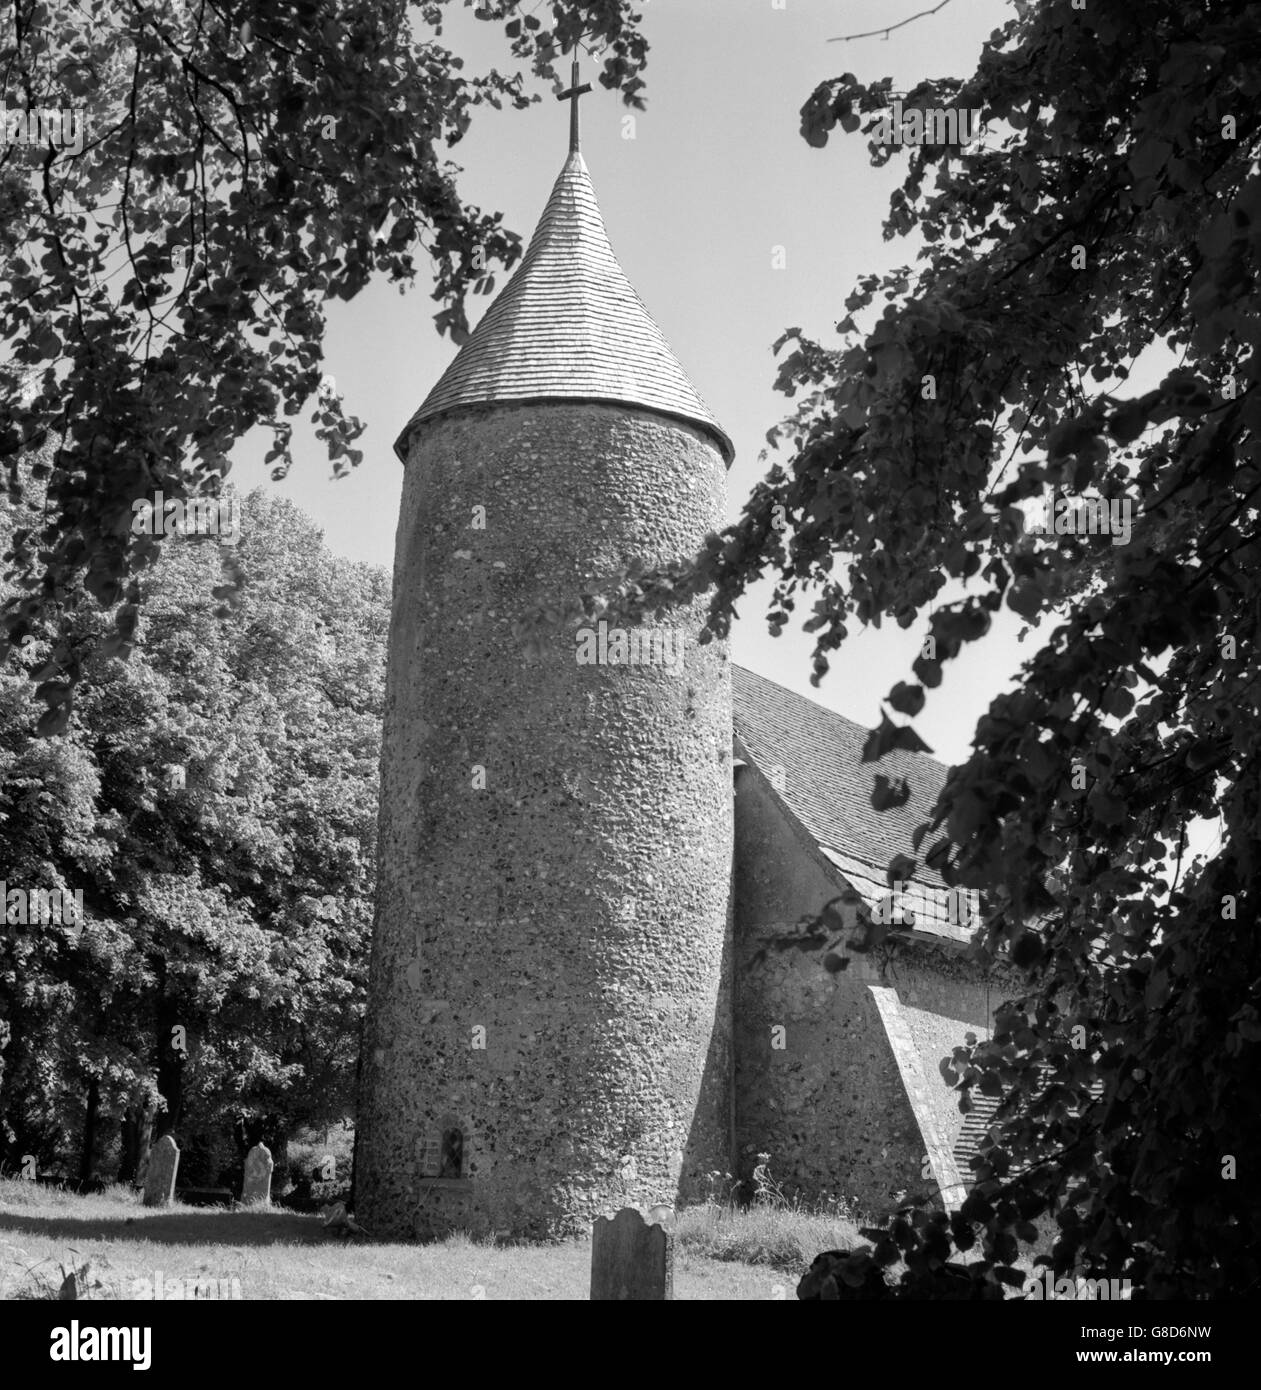 The little flint church at Southease, near Lewes, Sussex, which predates the Norman Conquest and is now celebrating 1,000 years of recorded history. The Round Tower and most of the present building is Norman, but some parts of the ancient structure remain. Stock Photo